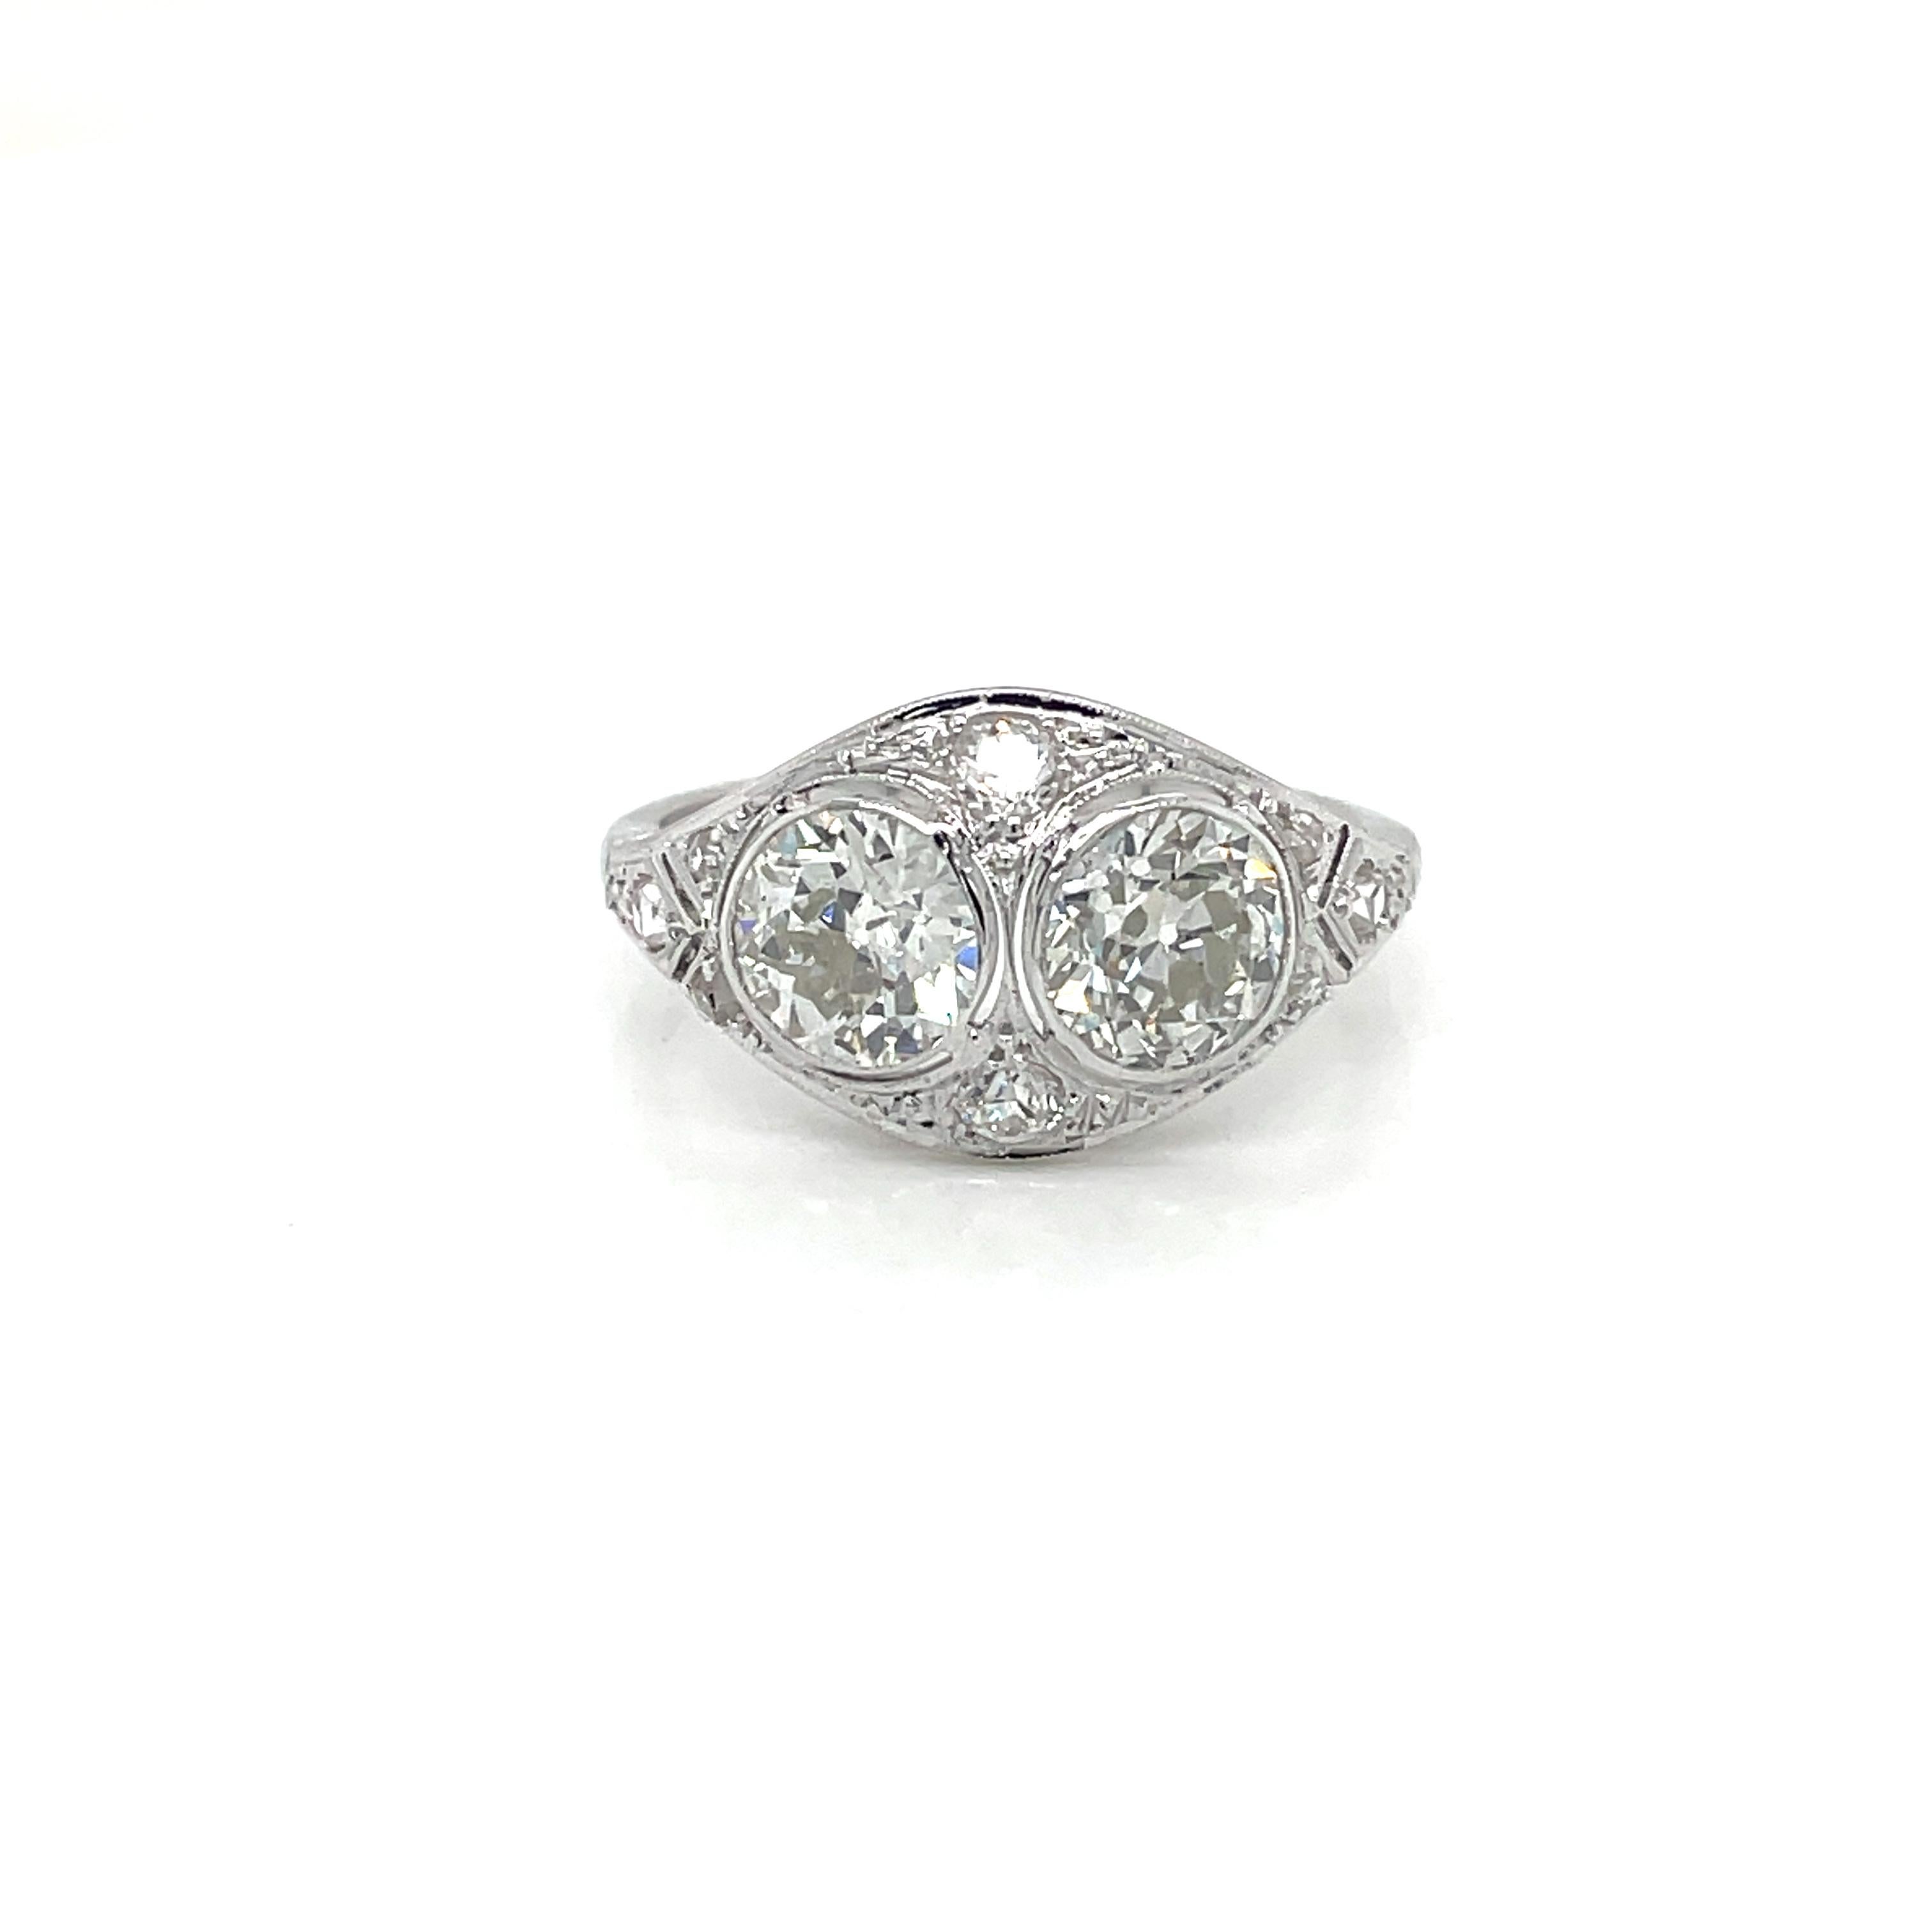 Important genuine Art Deco jewel, this ring is hand-crafted in 18k white gold, authentic from 1920, featuring in the center a perfect couple of sparkling Old mine-cut Diamond weighing 2.30 carats together, graded H color Vs2, surrounded by 0.15